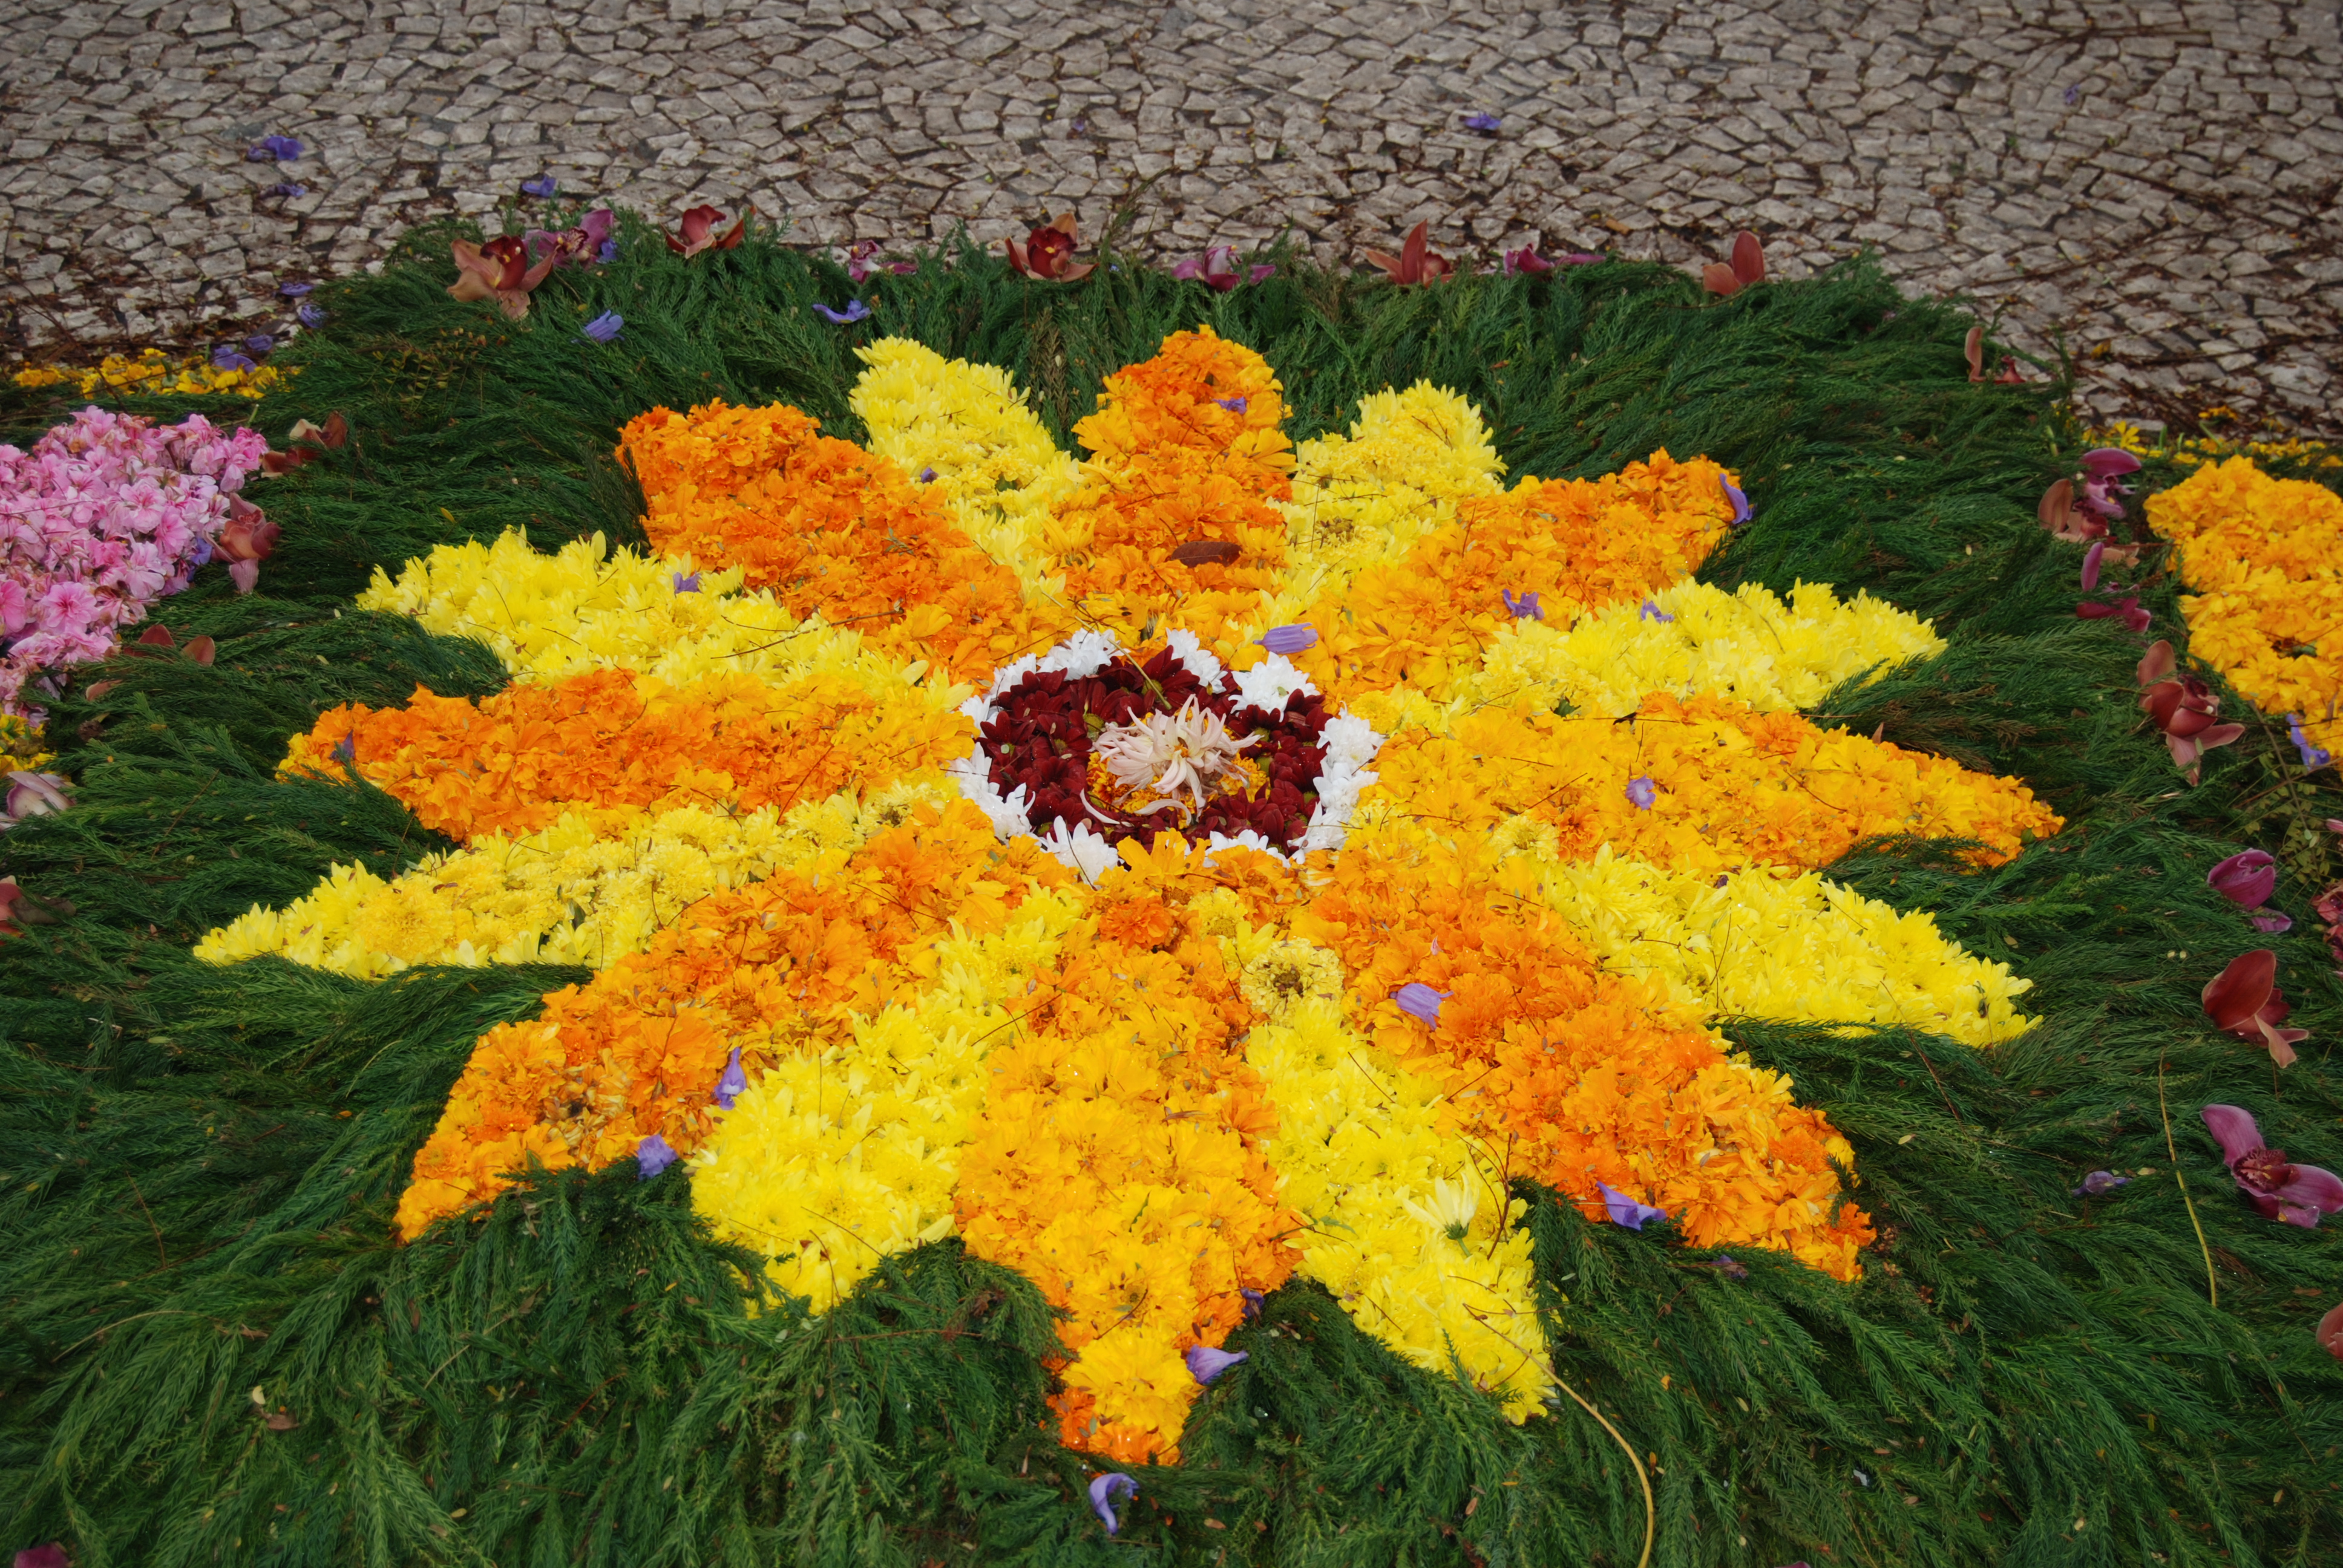 File:Flower decorations during the Flower Festival, Funchal, Maderia,  Portugal.jpg - Wikipedia